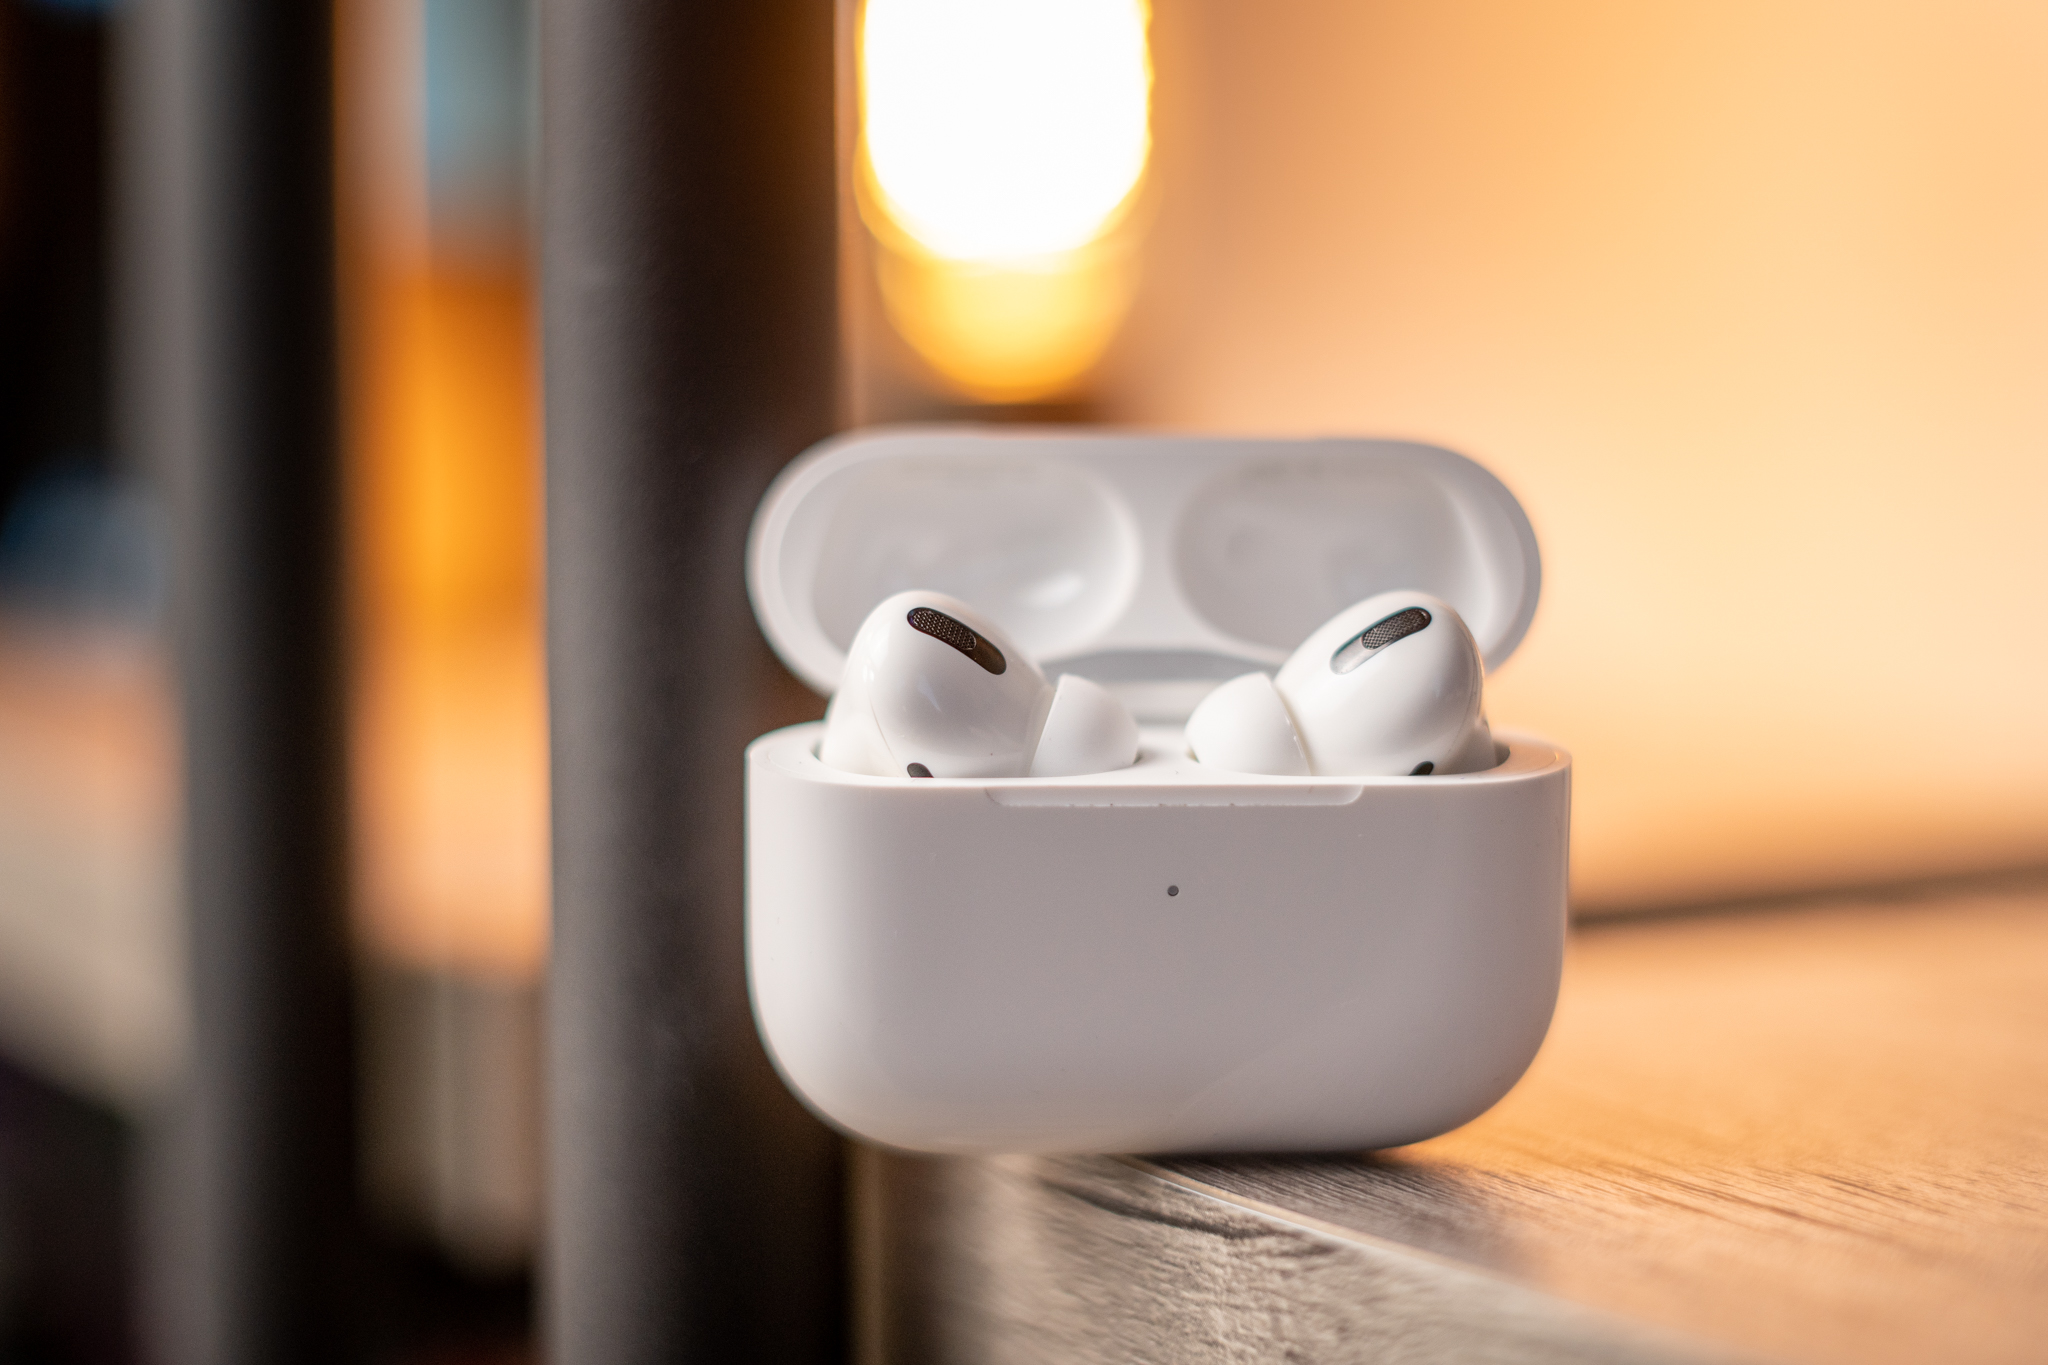 Airpods air pro. Apple AIRPODS Pro 2. Наушники Air pods Pro 2. Наушники TWS Apple AIRPODS Pro. AIRPODS pods 2 Pro.